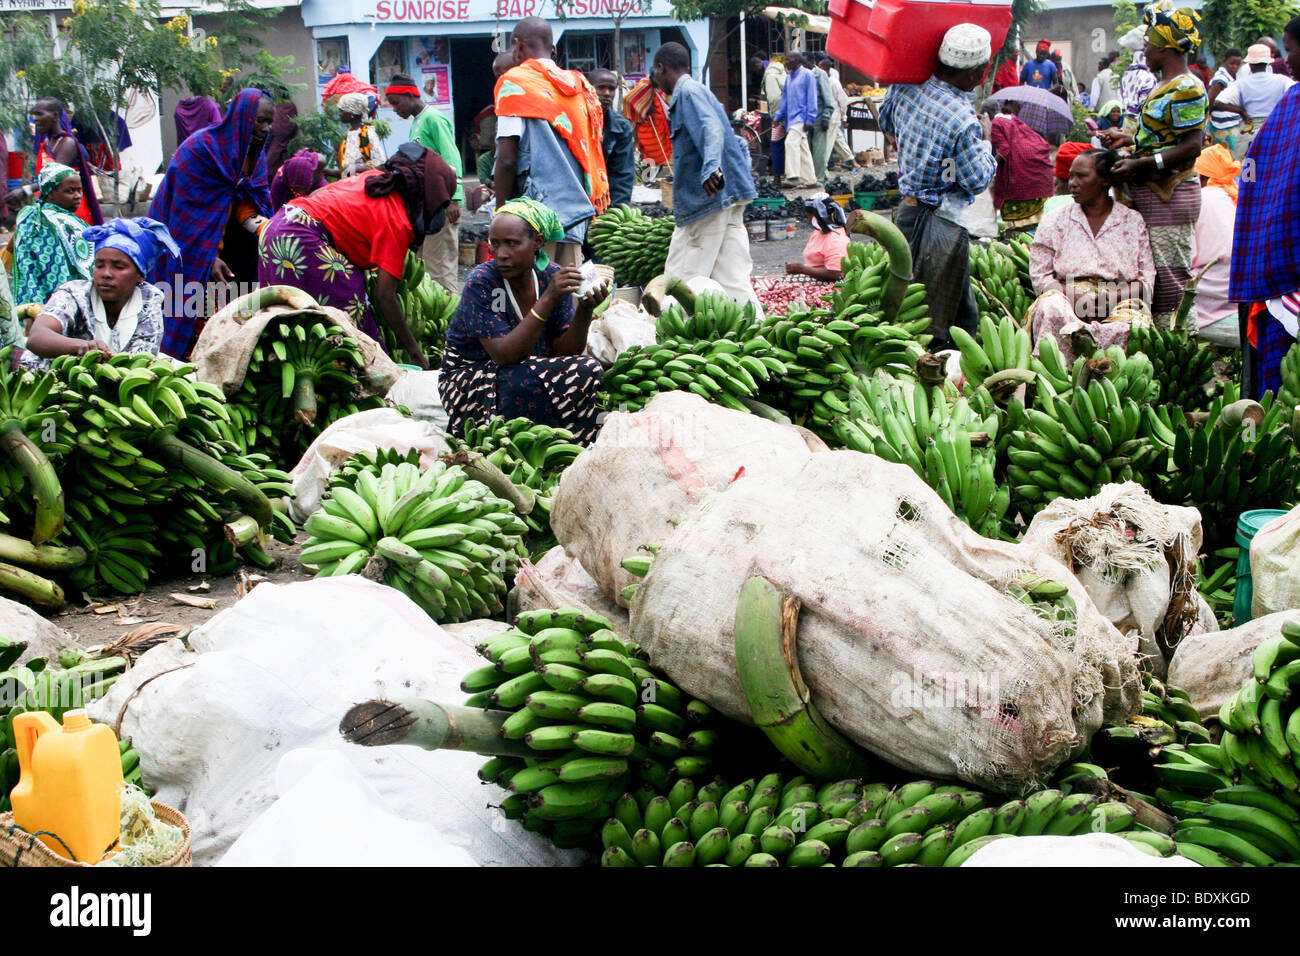 Africa, Tanzania, Frontier Market selling bananas The goods are placed on a blanket on the ground Stock Photo